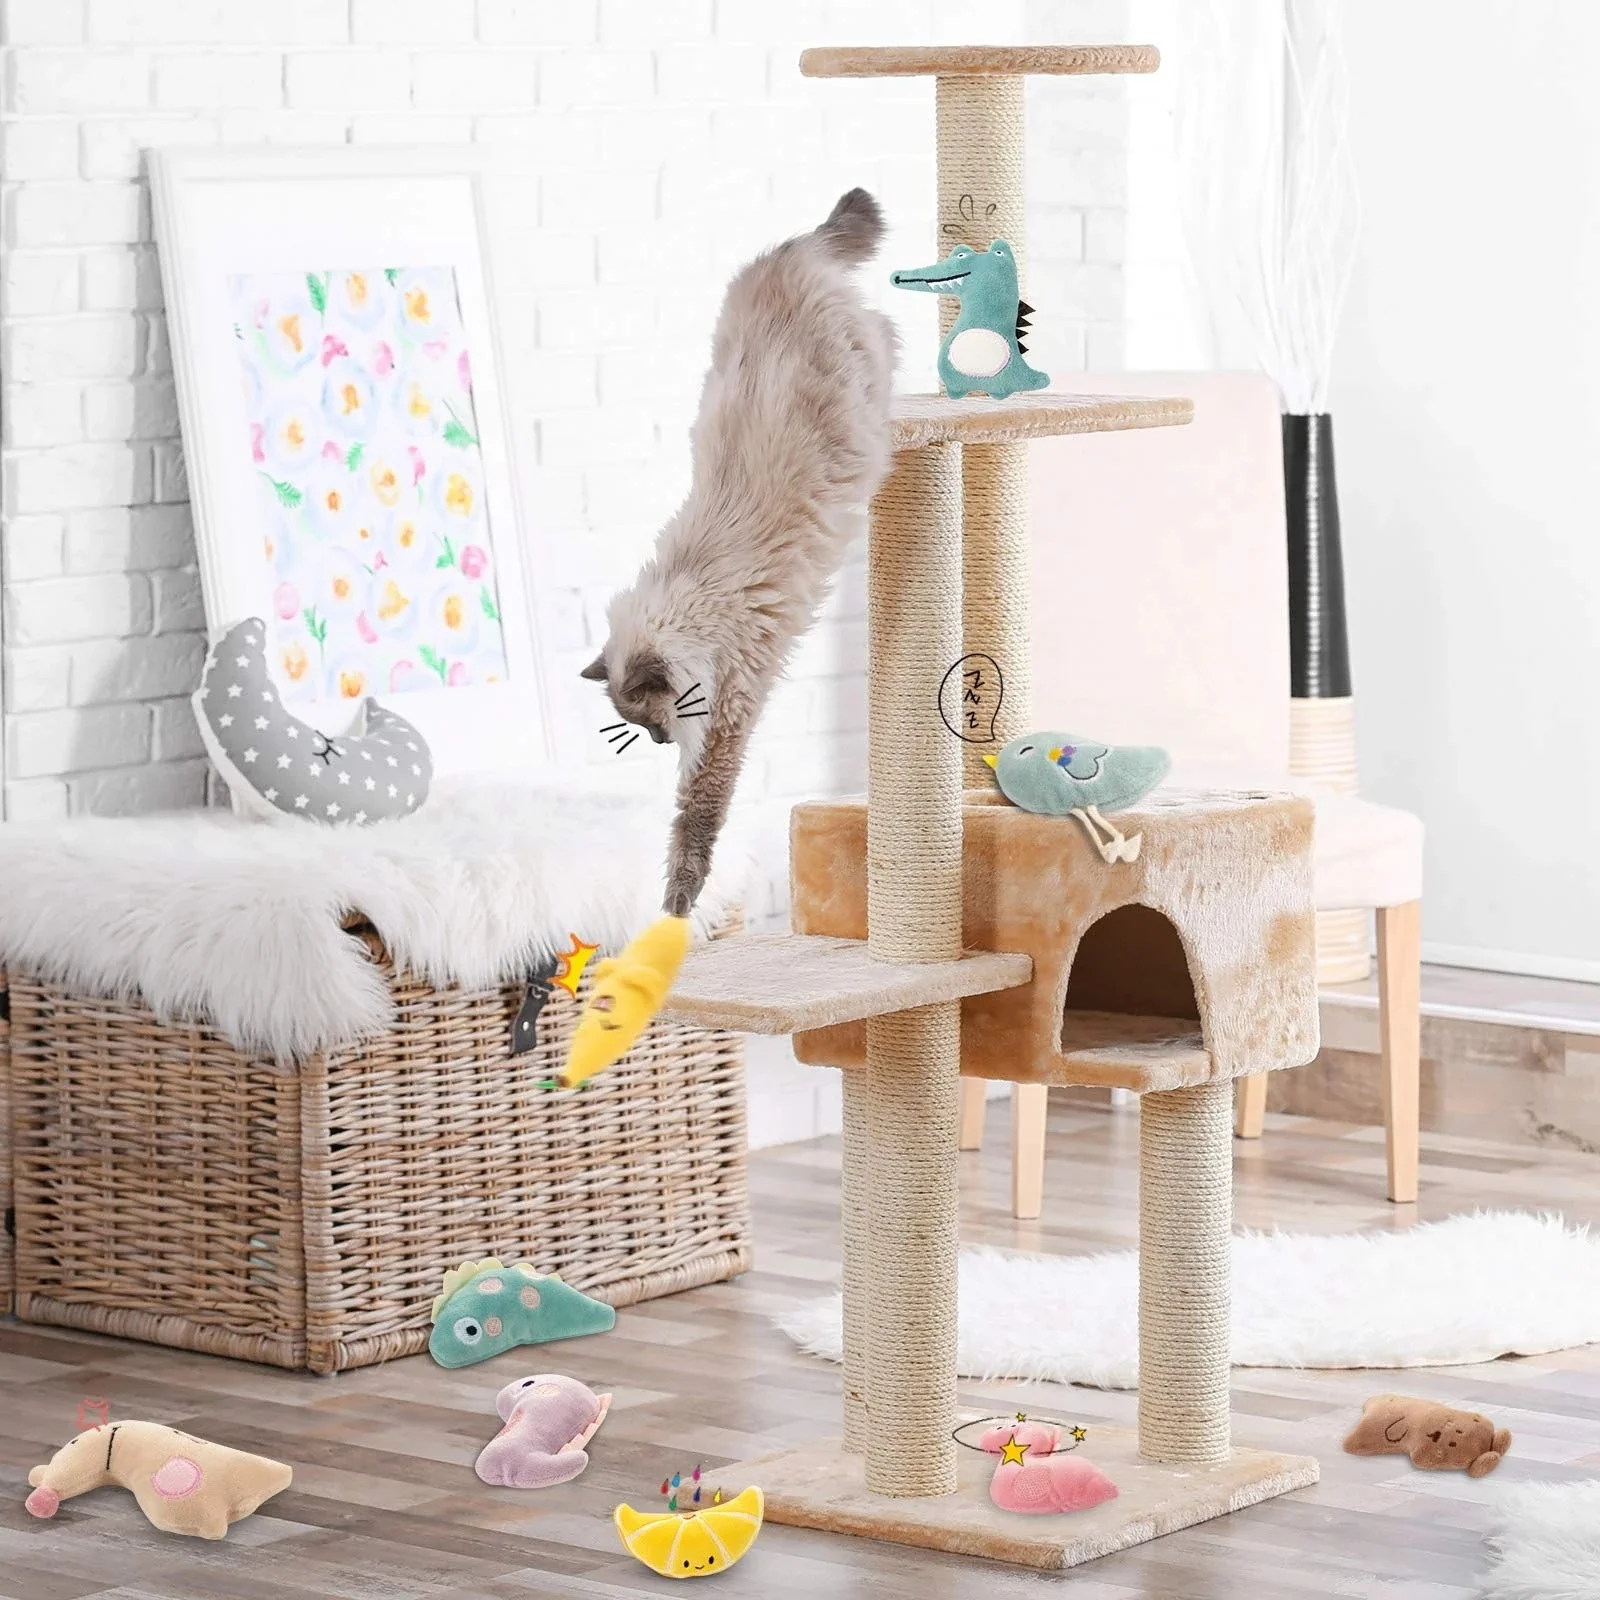 

Cat Toy Catnip Interactive Plush Stuffed Chew Pet Toys Claw Funny Cat Mint Soft Teeth Cleaning Toy For Cat Kitten Pet Products, As the picture shows